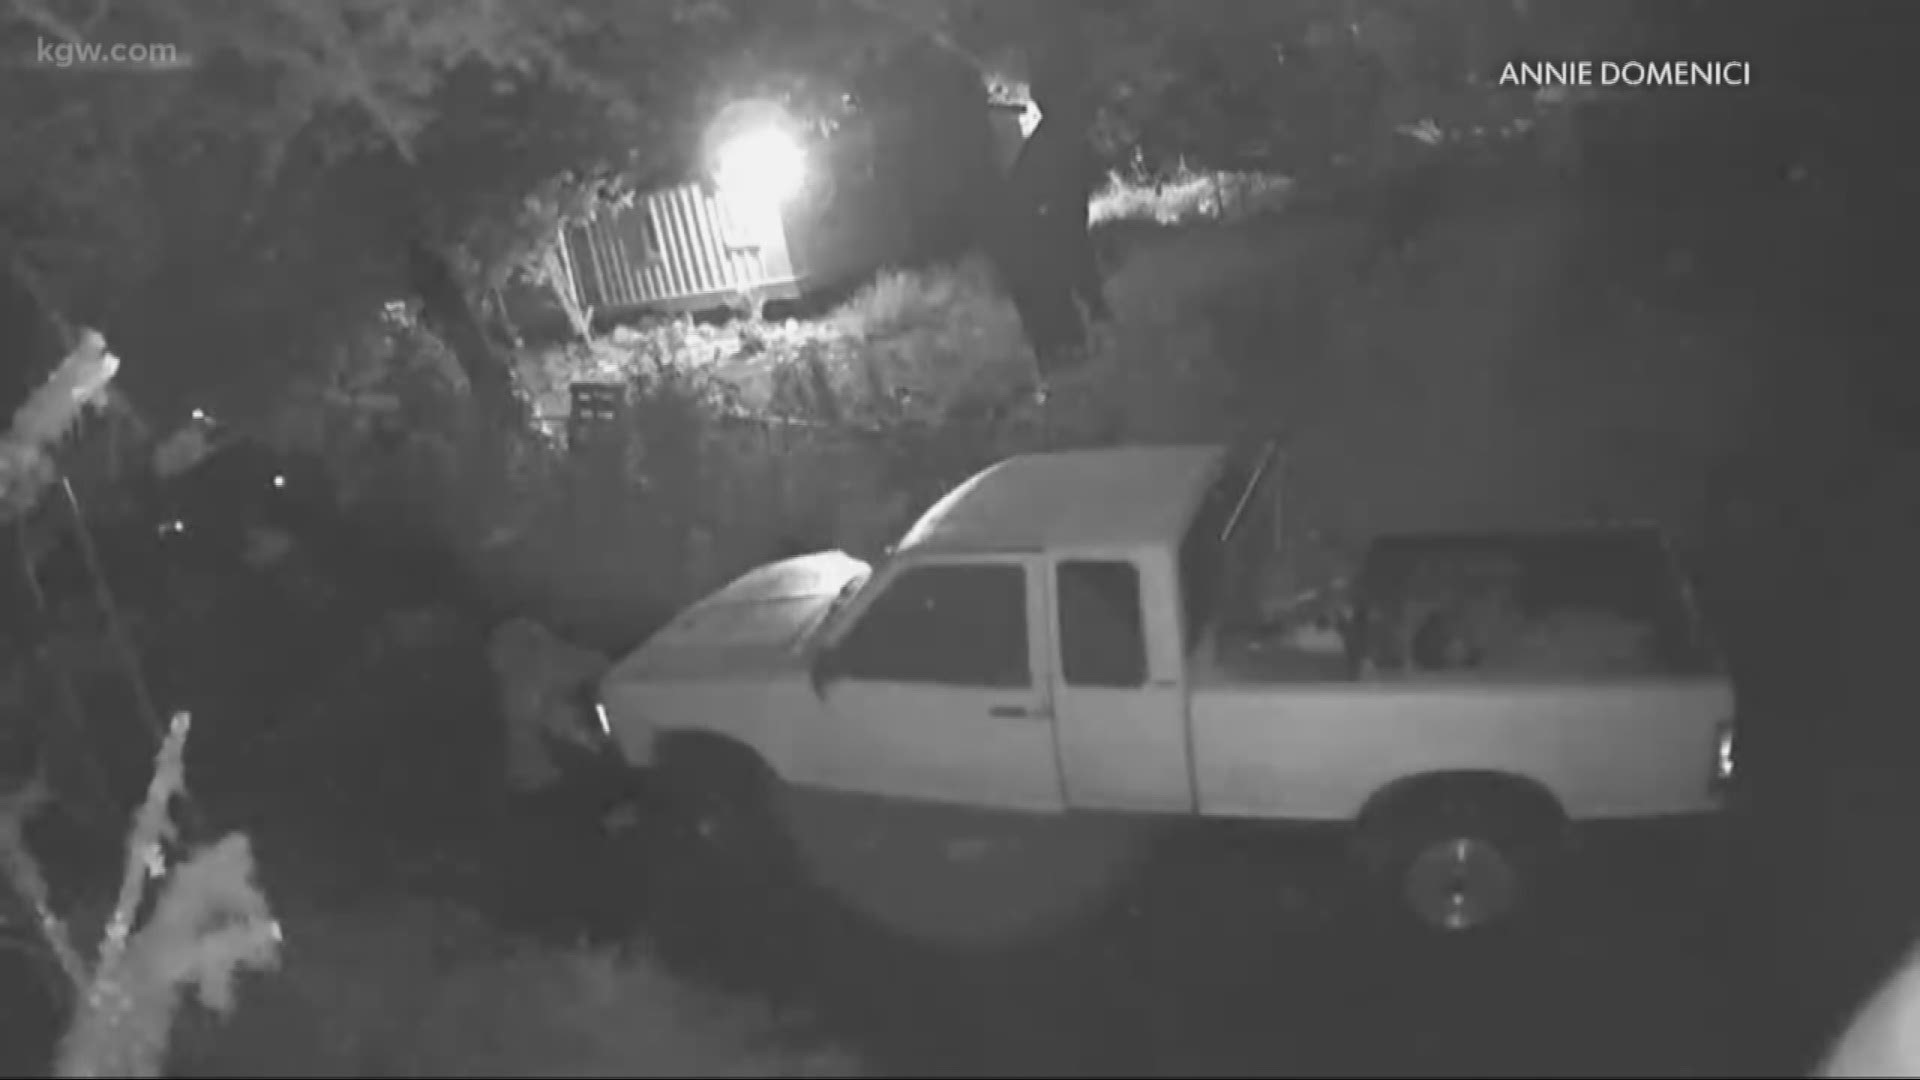 A lot of families are turning to video surveillance and live feeds to protect their property. But a North Plains couple found out that even catching criminals in the act doesn’t always end with the thieves behind bars.